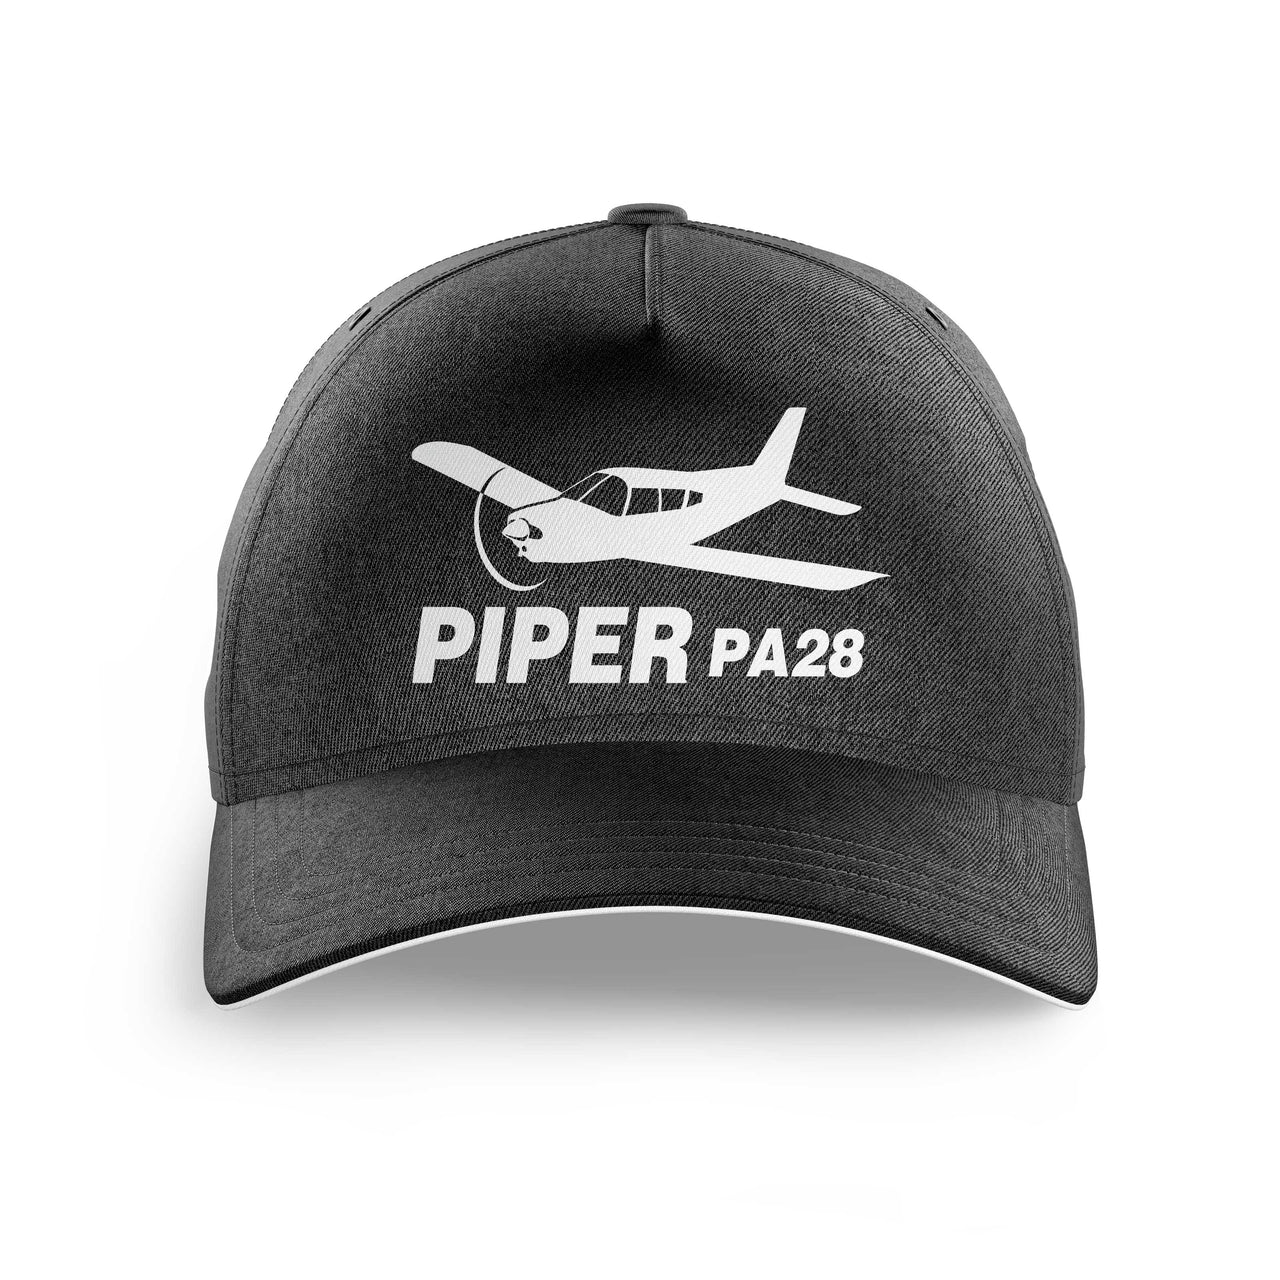 The Piper PA28 Printed Hats